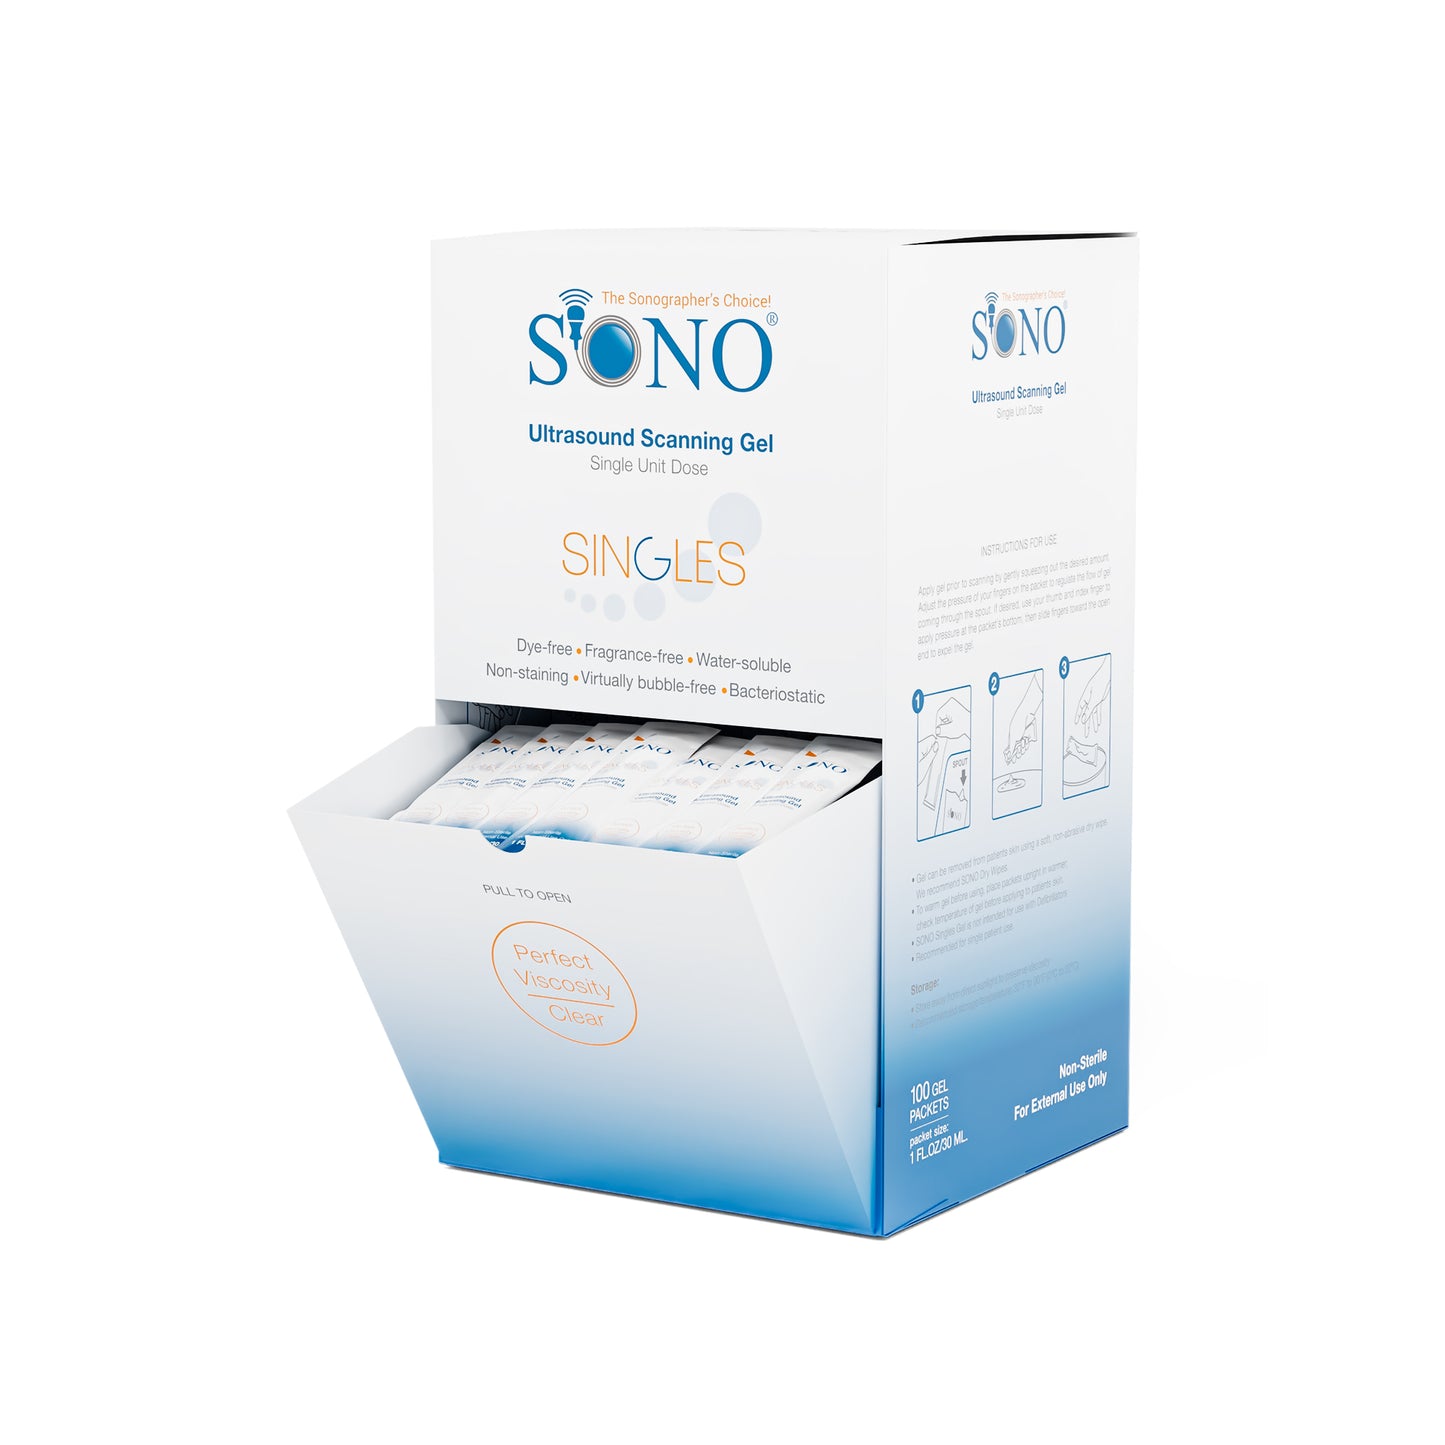 Updated Packaging of SONO Ultrasound Scanning Gel - Single Gel Packets for Convenient and Efficient Use in Medical Scanning